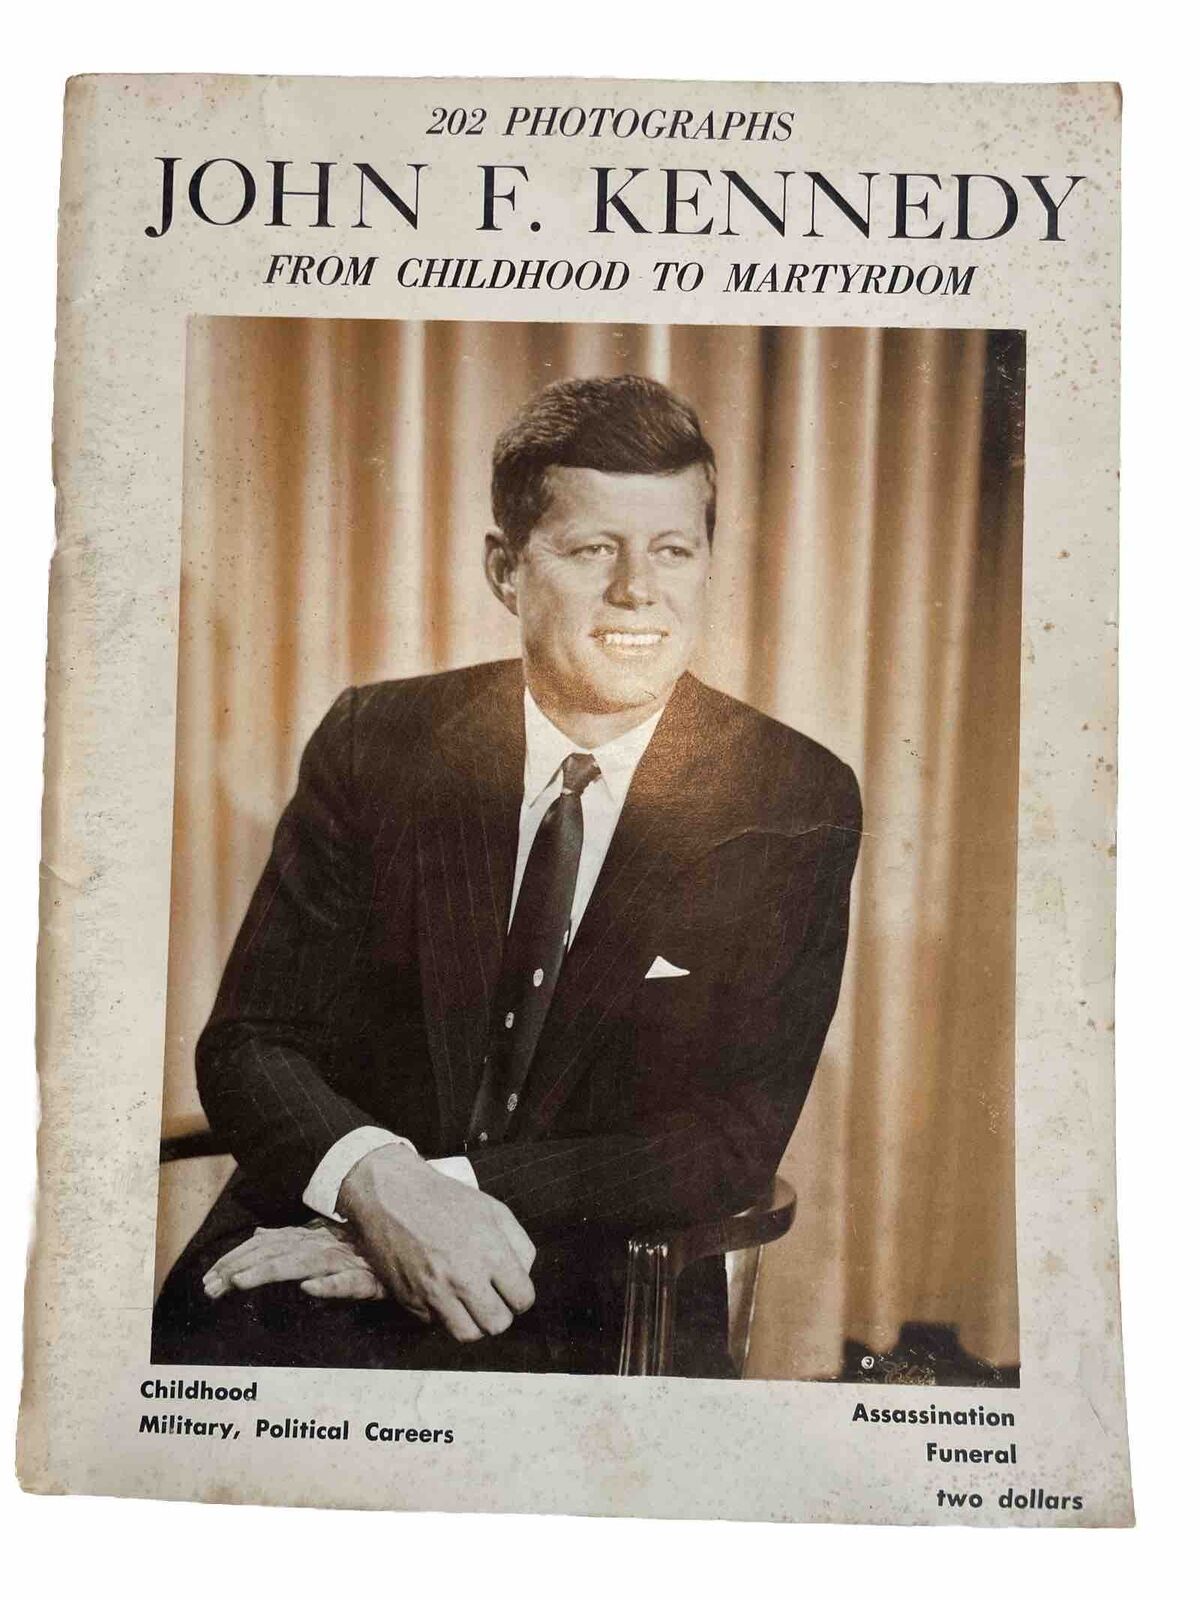 1963 JOHN F. KENNEDY FROM CHILDHOOD TO MARTYRDOM TRIBUTE BOOK 202 Pictures